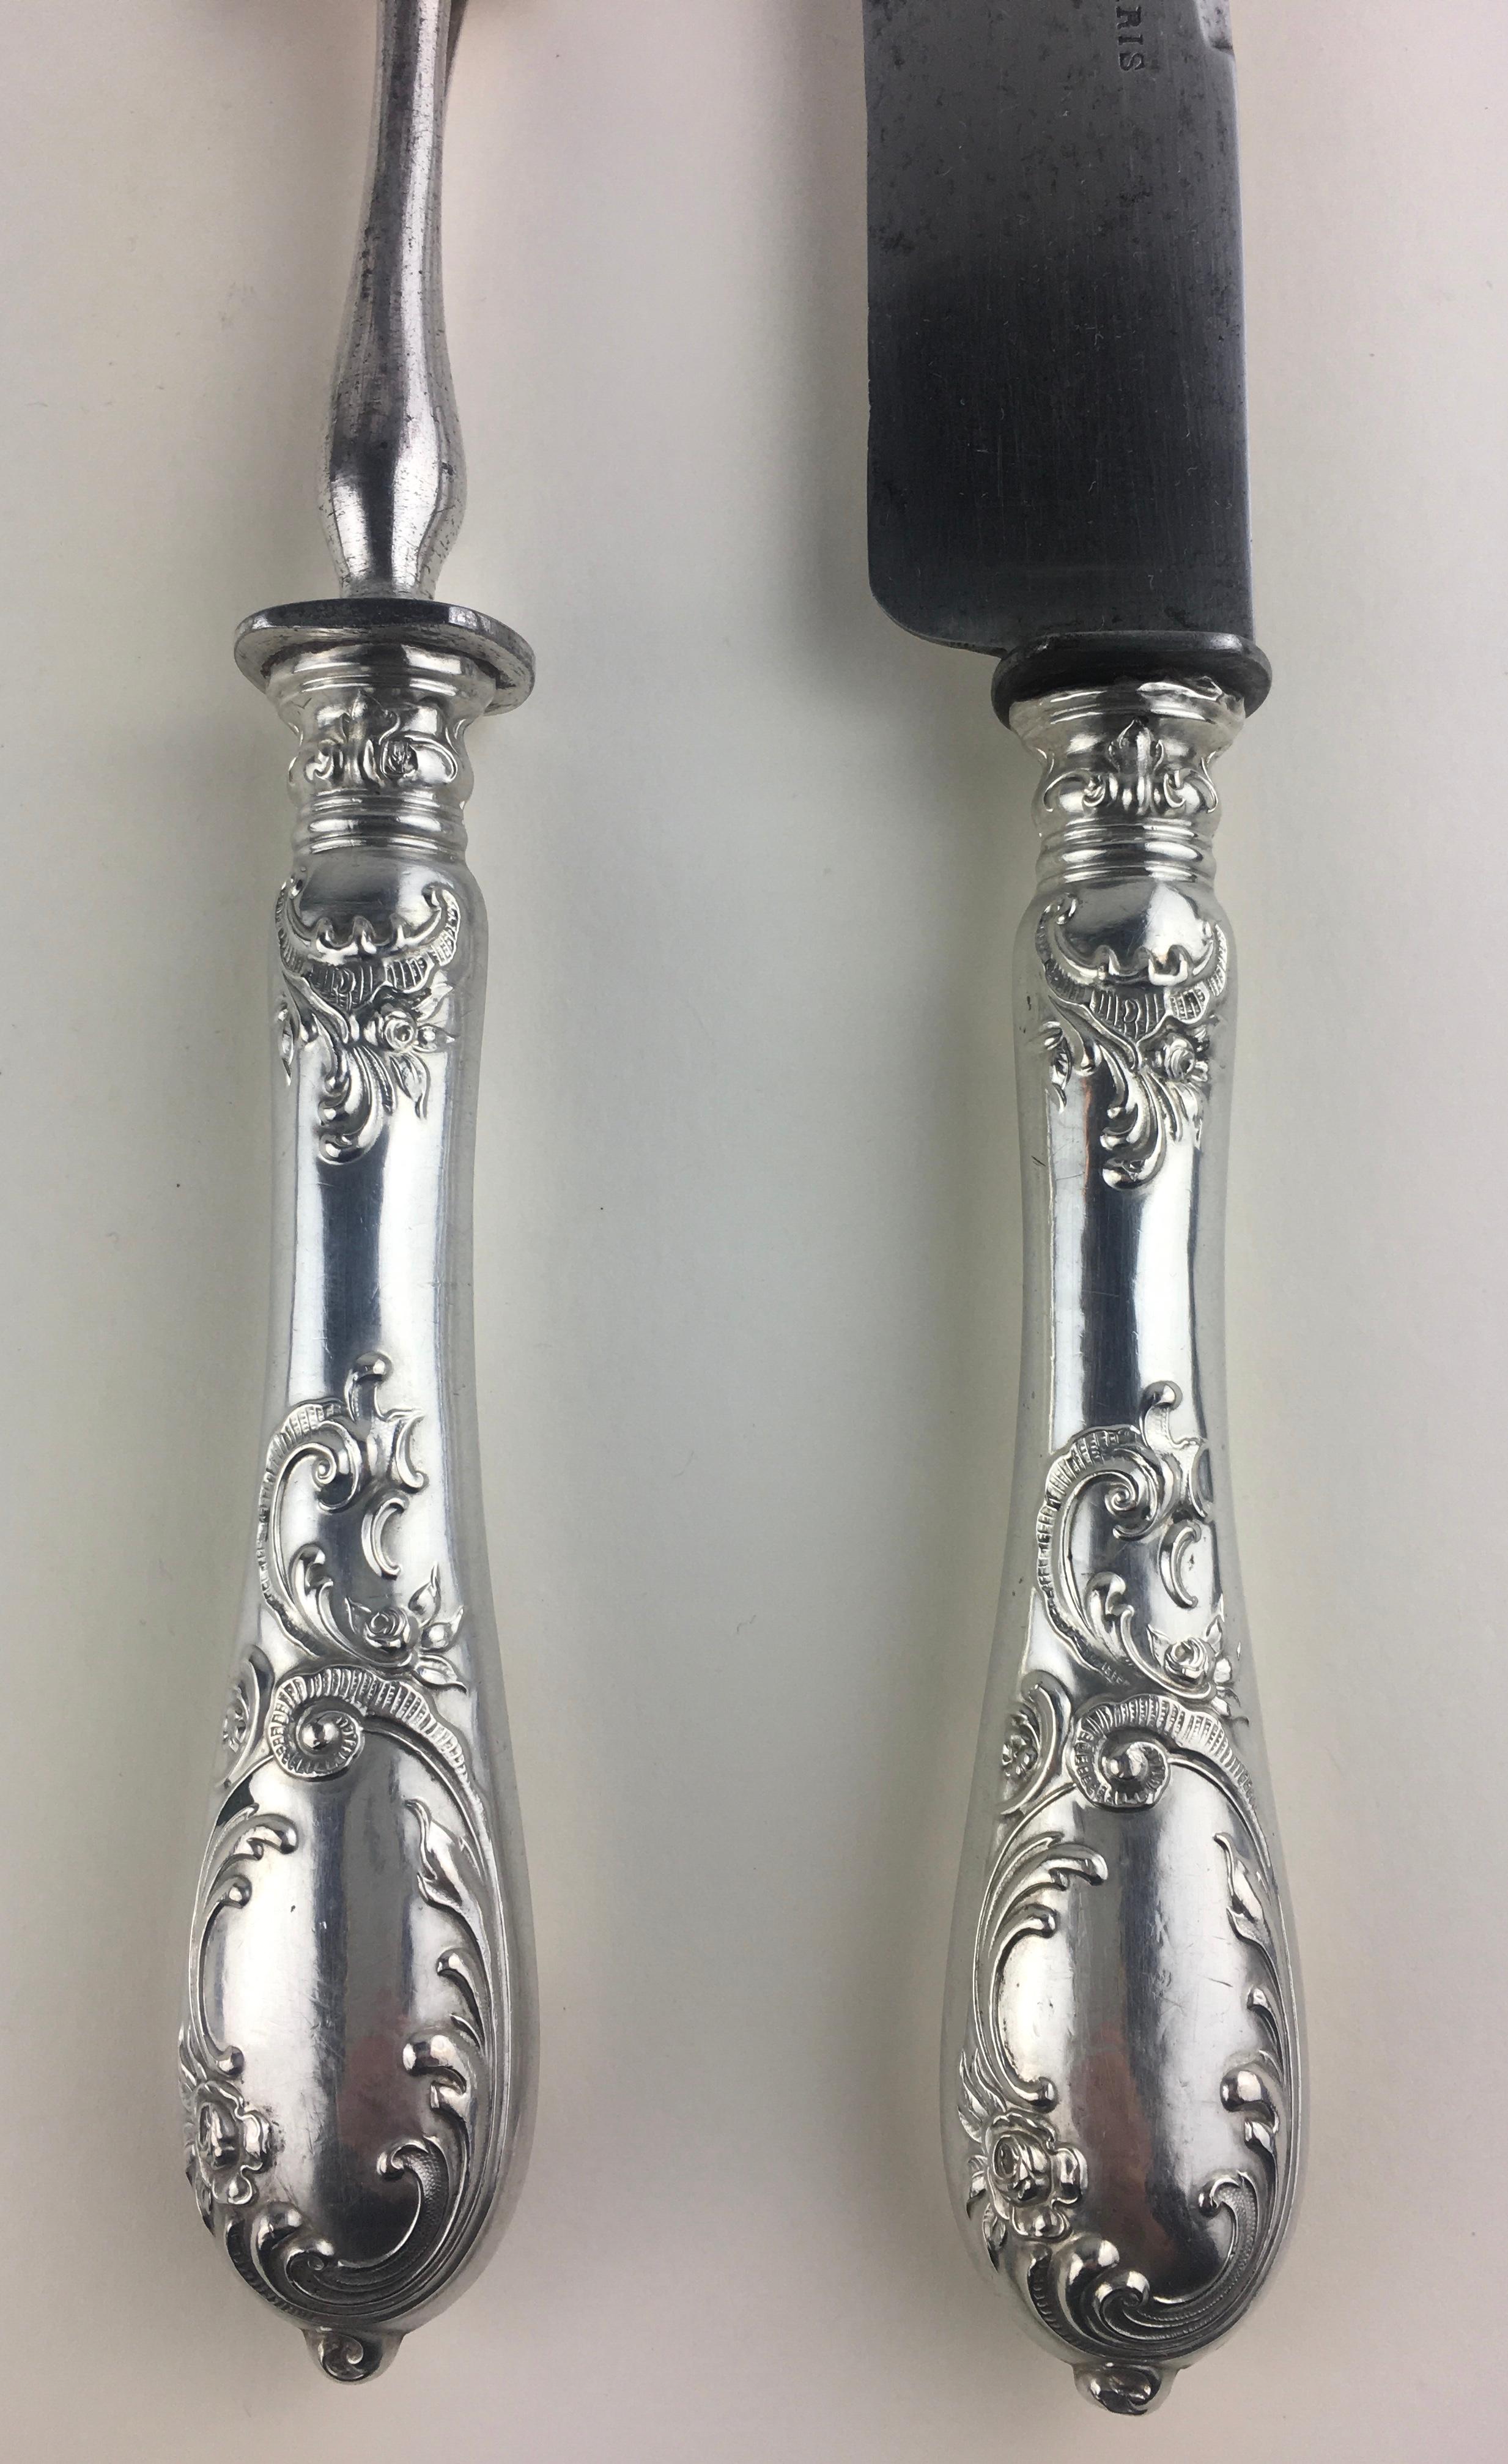 Art Nouveau French sterling silver carving set comprised of a large knife stamped Paris and a fork, circa 1880-1930

The set have a fantastic holly motif in Art Nouveau style.

Good condition consistent with age, some minor scratches and darkening